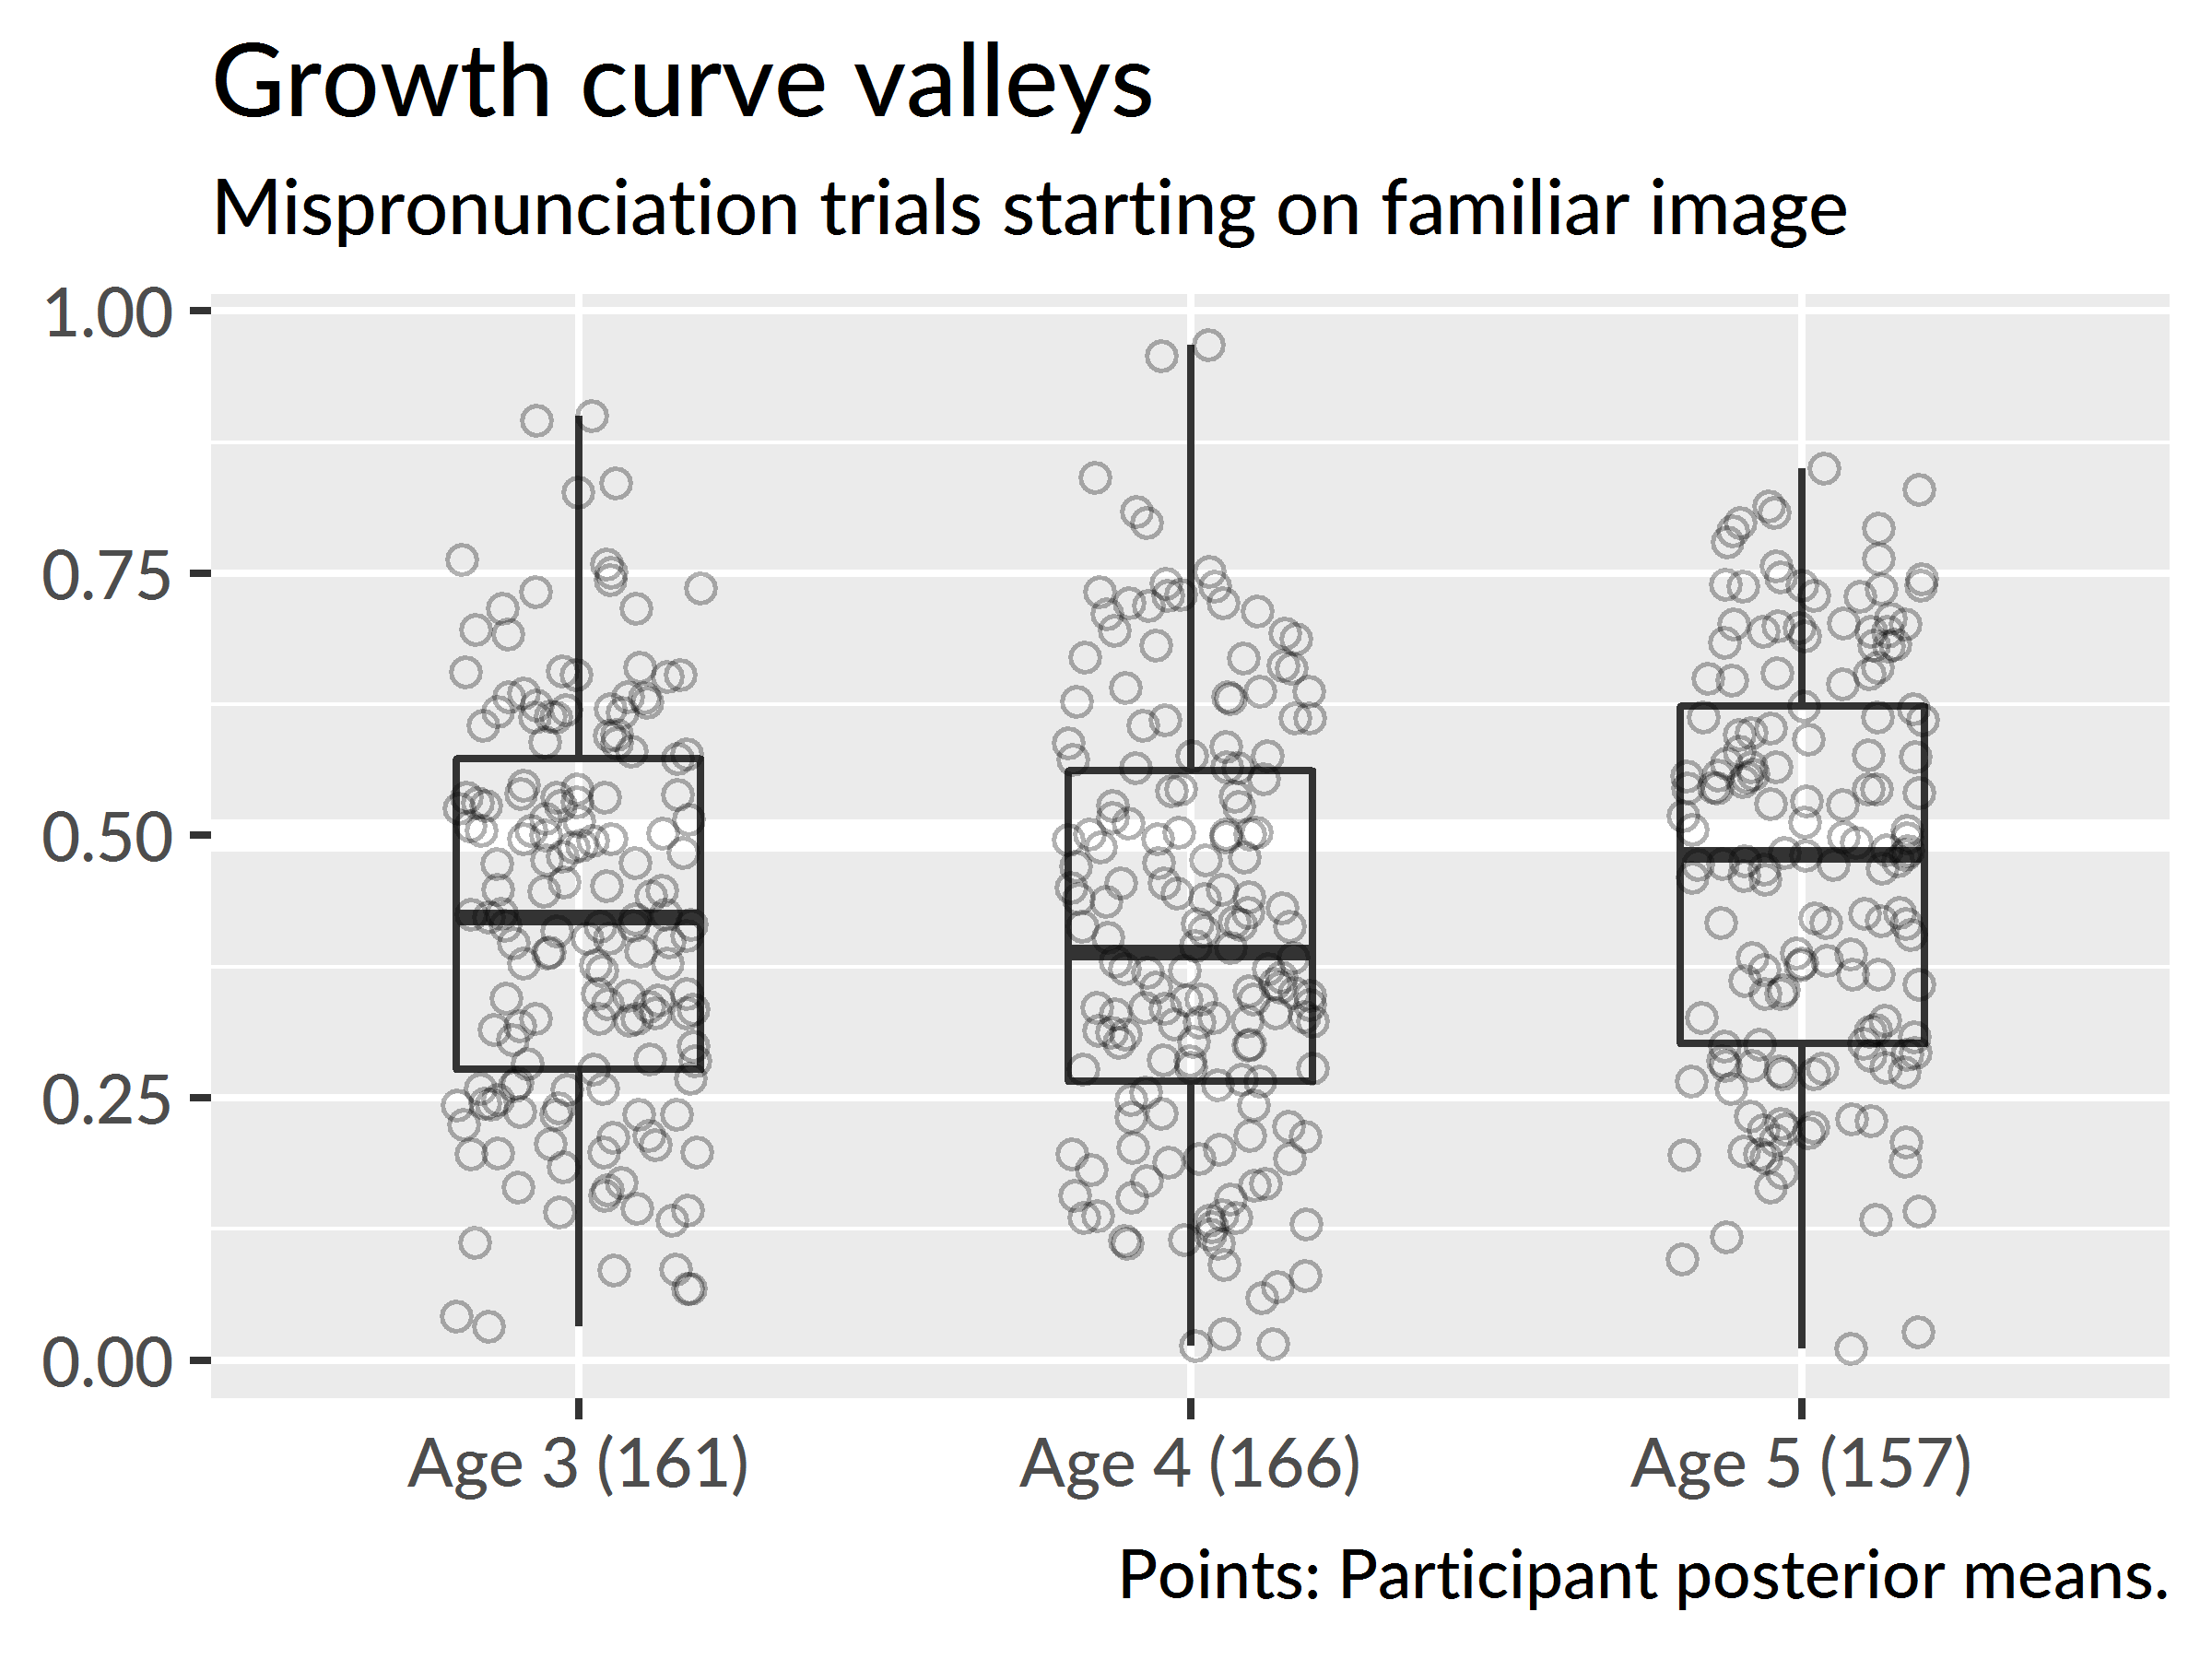 Growth curve valleys by age for mispronunciation trials starting on the familiar image.